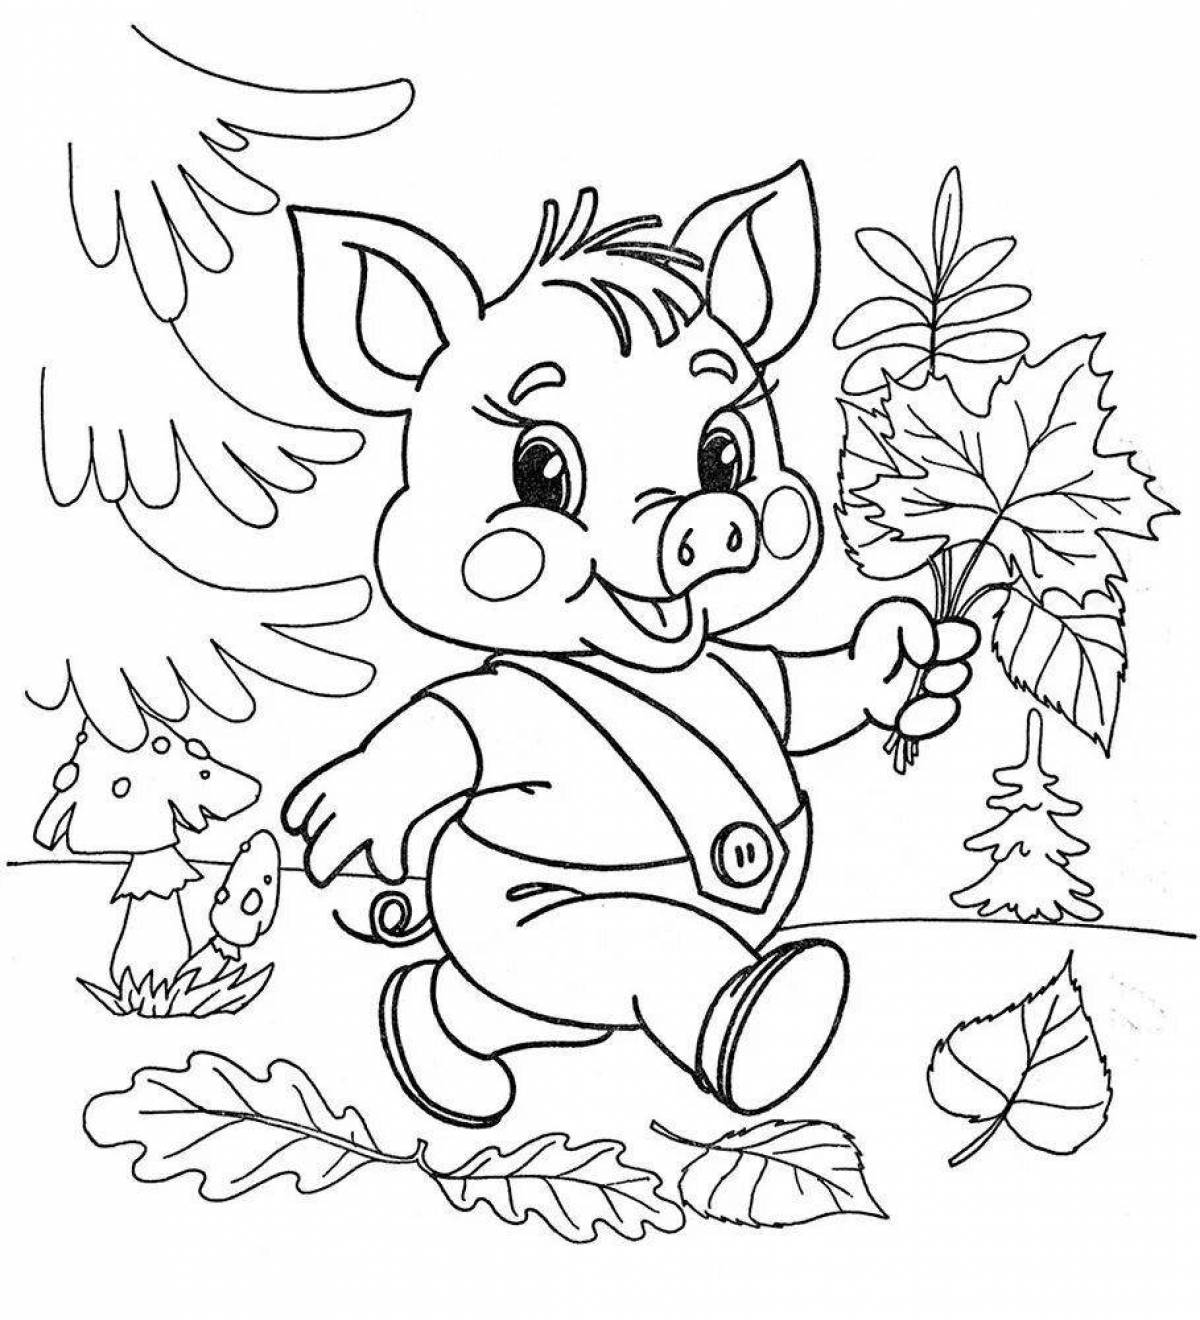 Coloring books for kids for kids #4